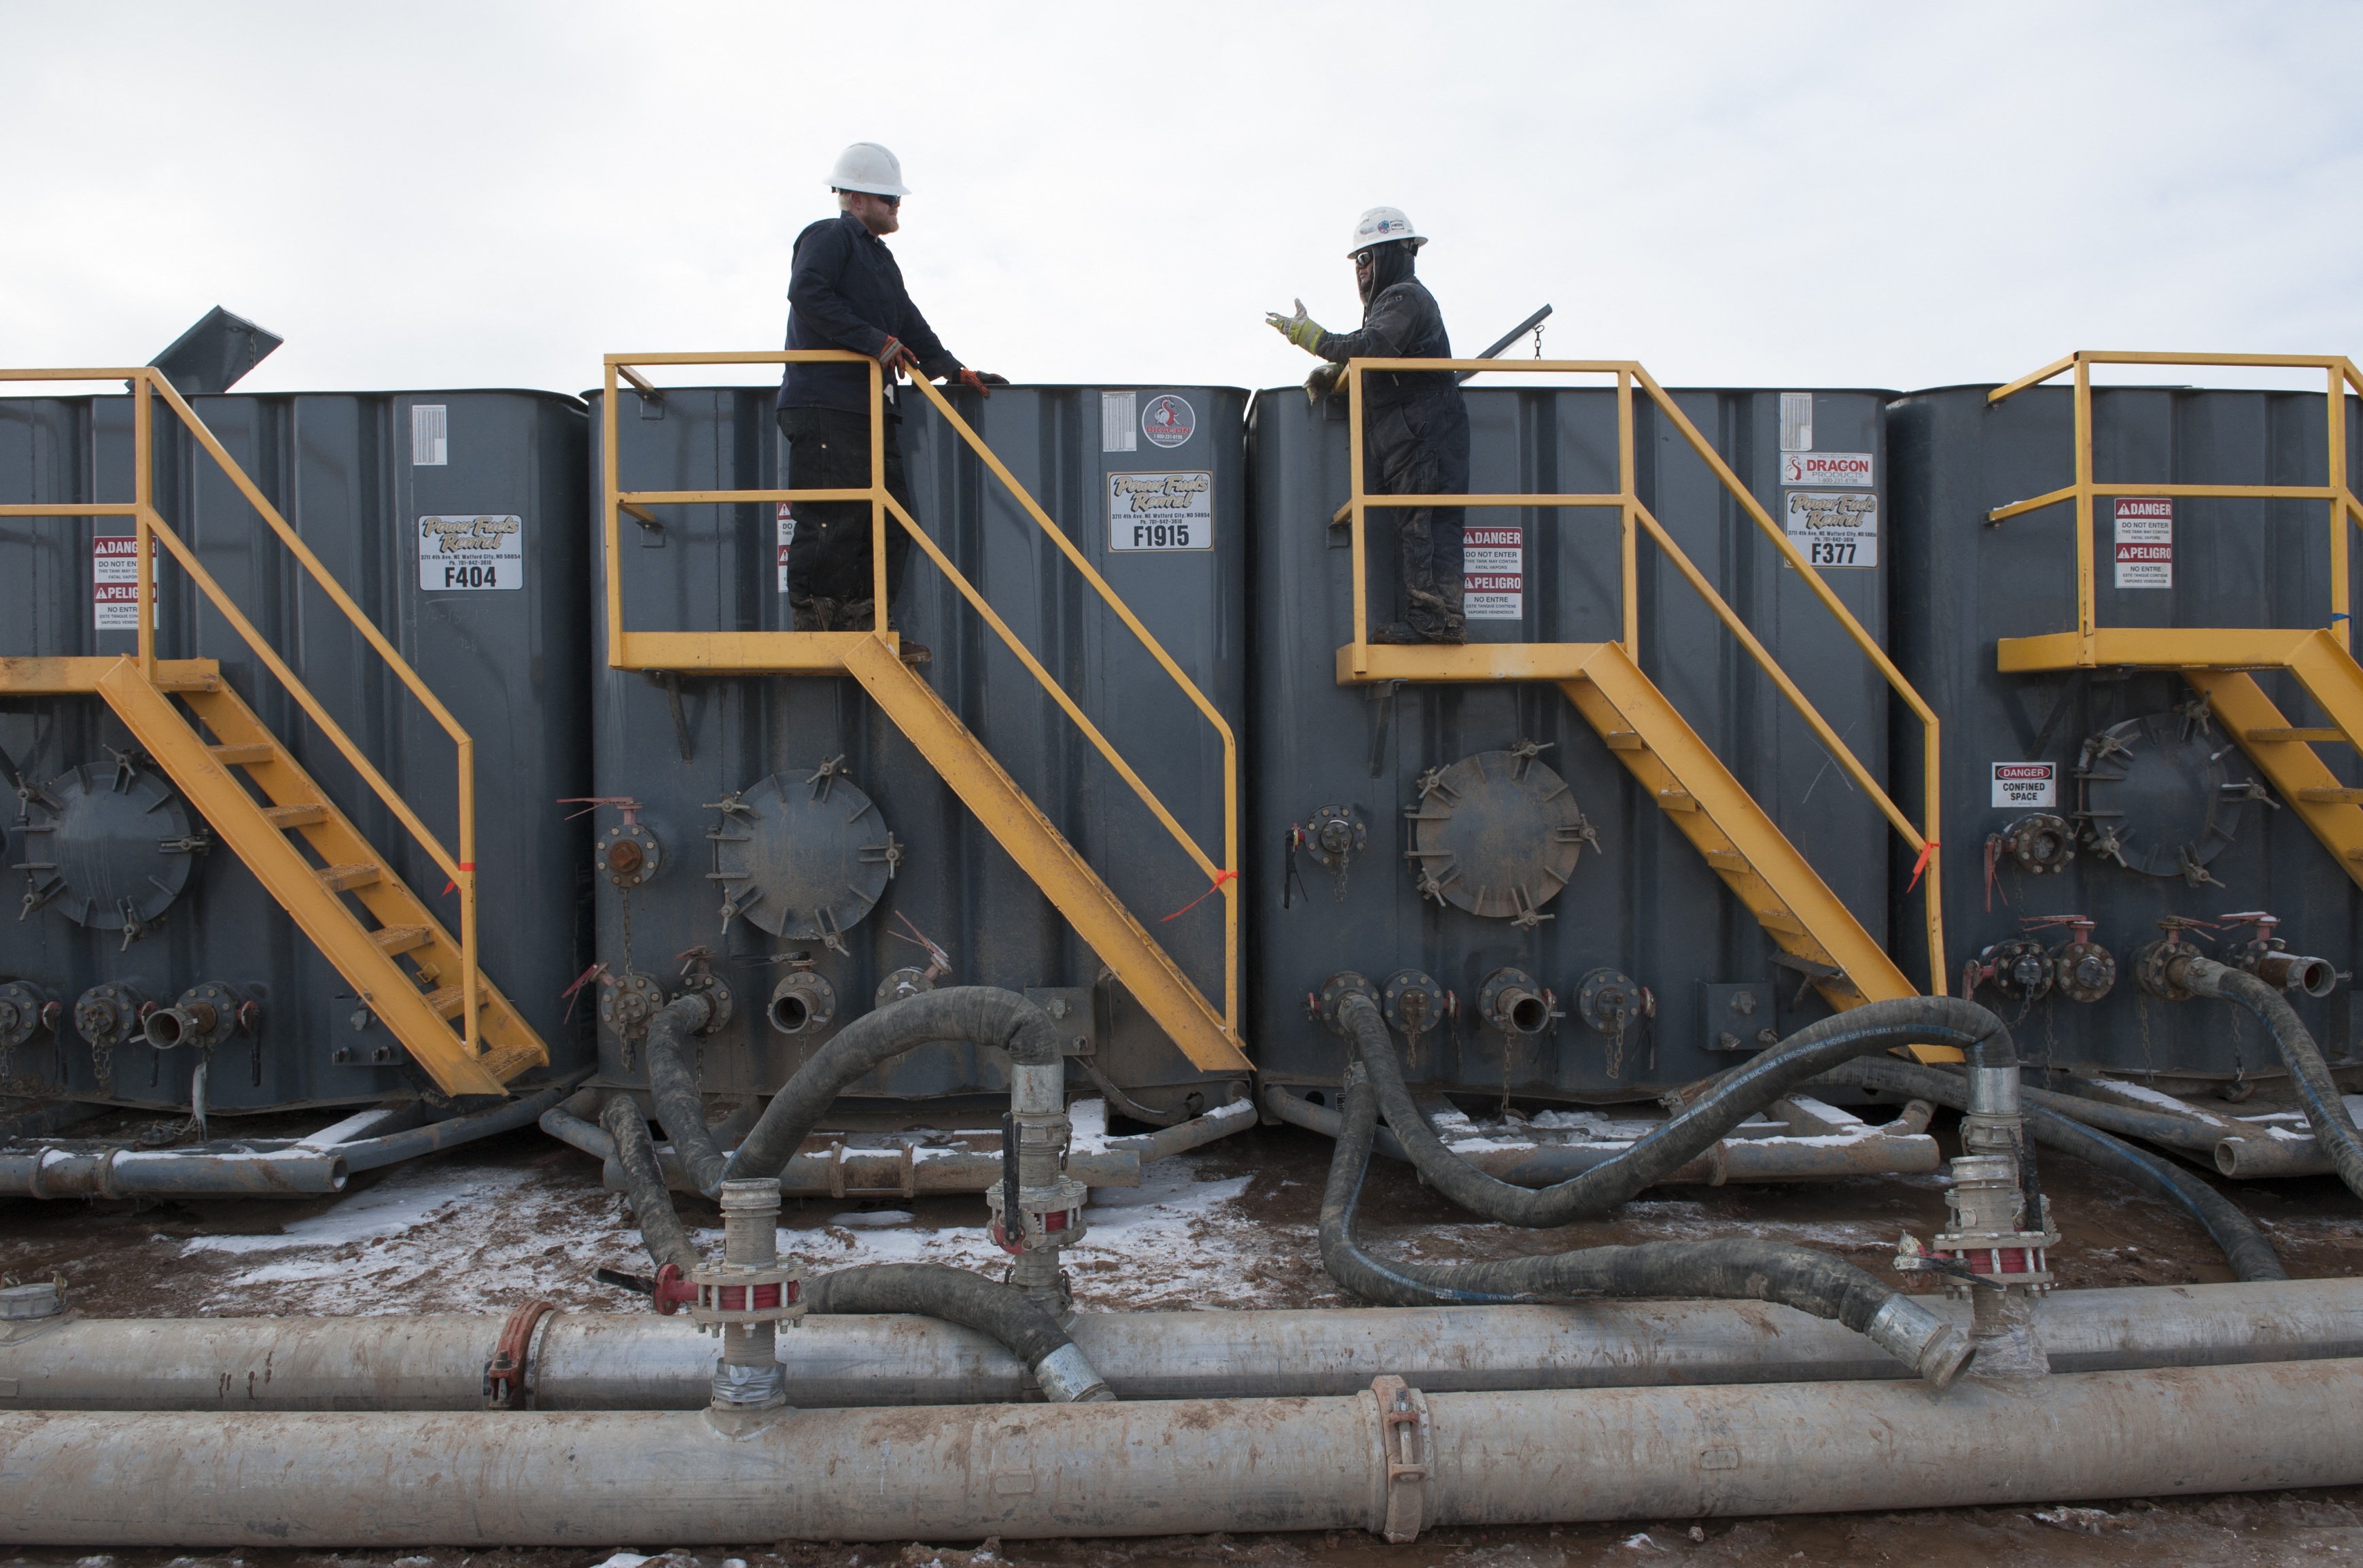 A worker monitors water tanks at a Hess fracking site near Williston